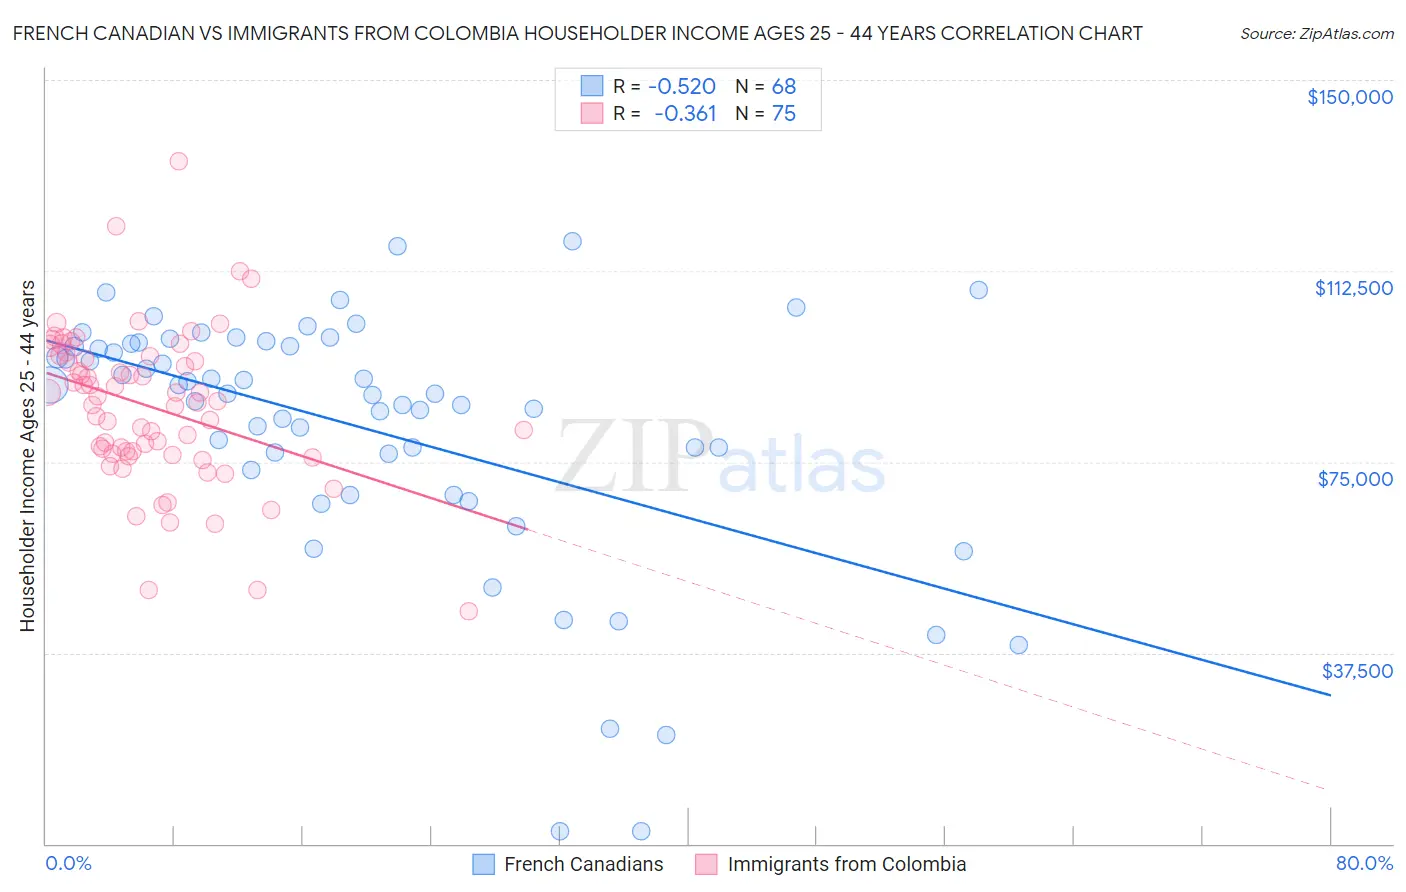 French Canadian vs Immigrants from Colombia Householder Income Ages 25 - 44 years